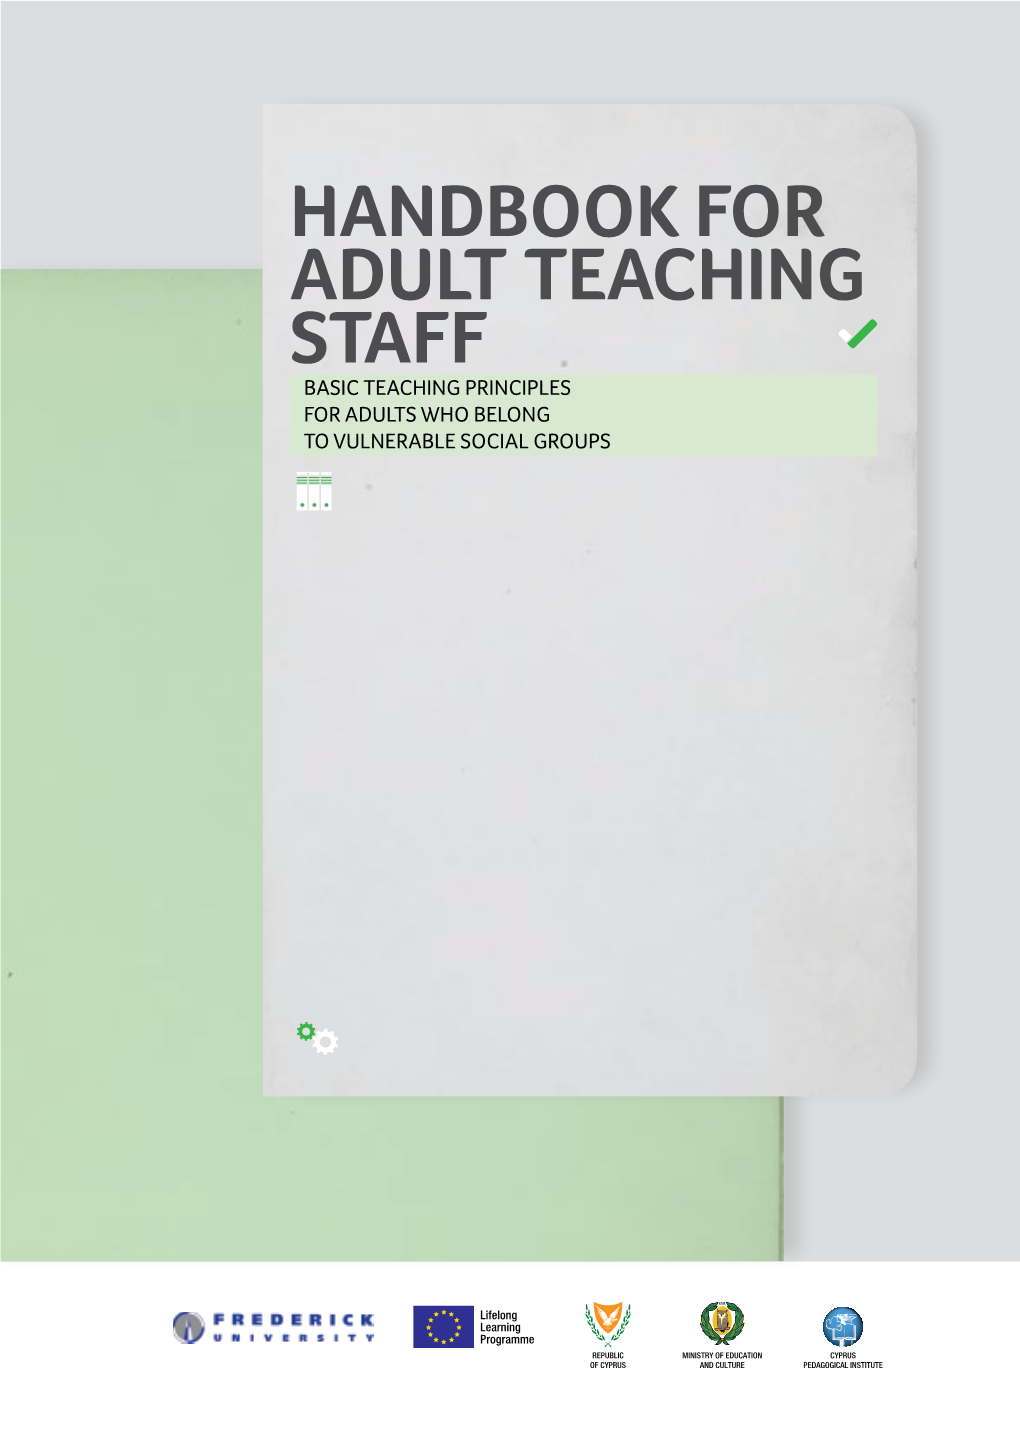 Handbook for Adult Teaching Staff Basic Teaching Principles for Adults Who Belong to Vulnerable Social Groups